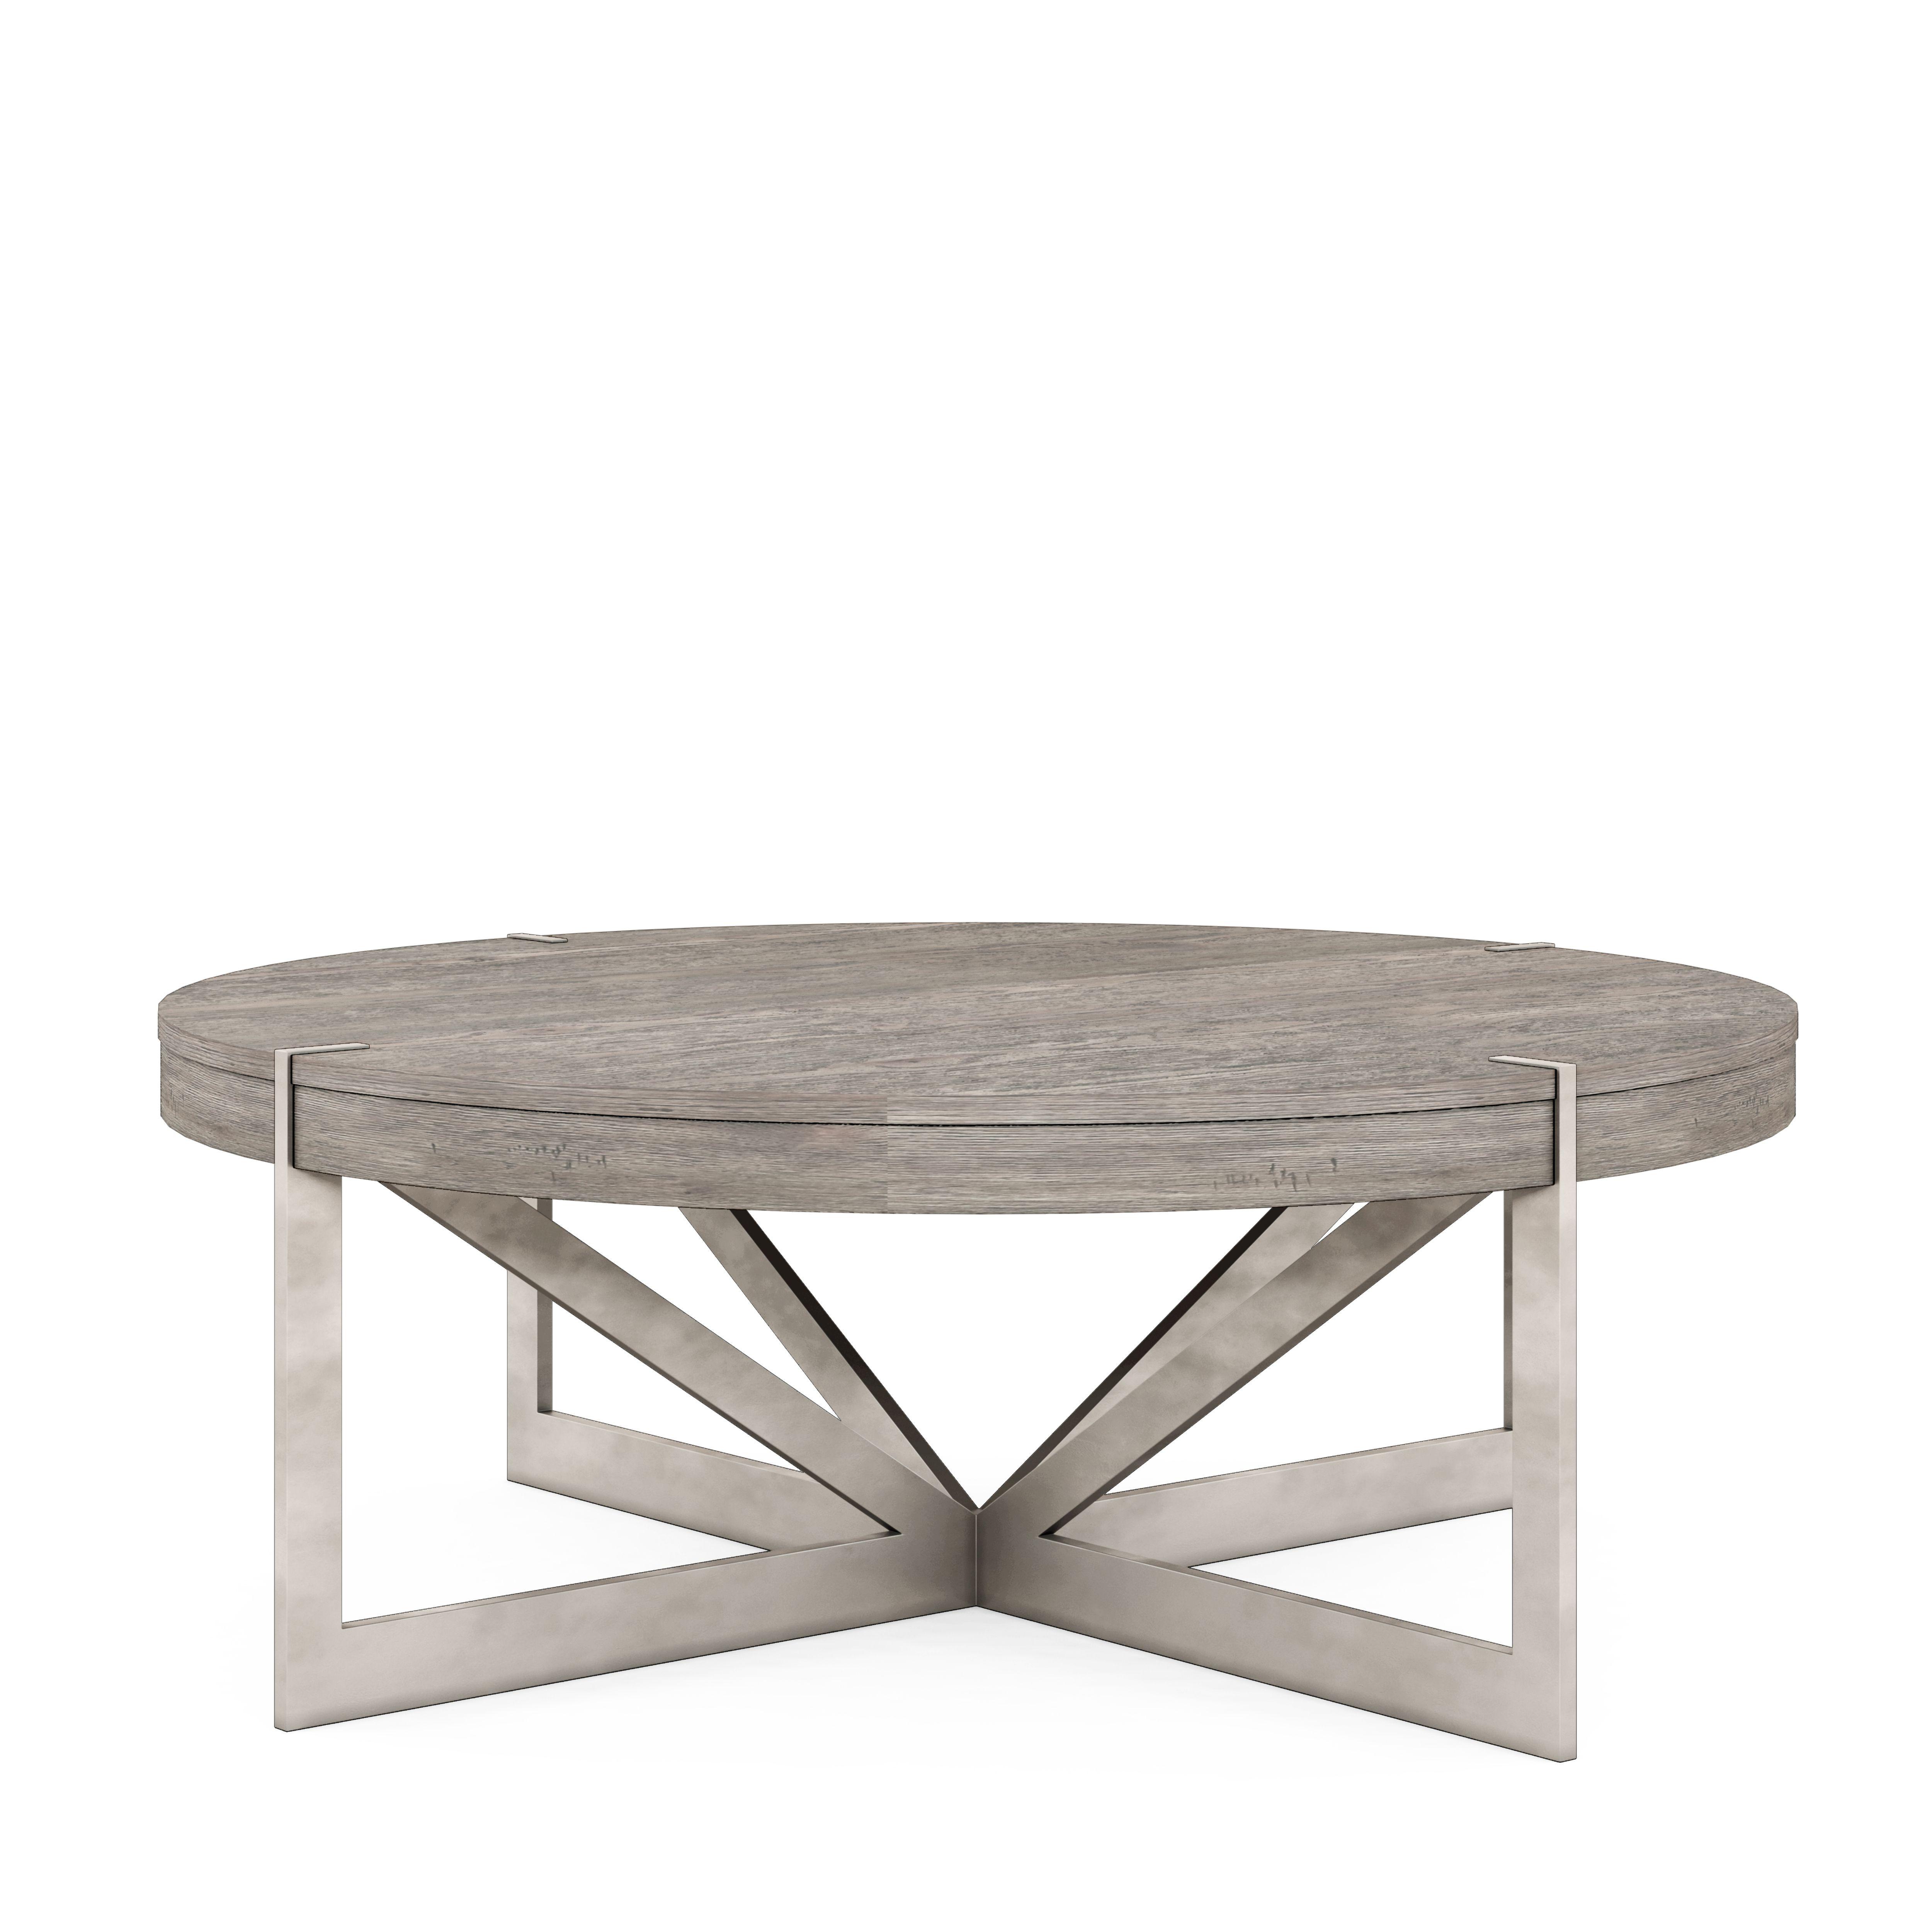 Contemporary Coffee Table Sojourn 316362-2311 in Beige 